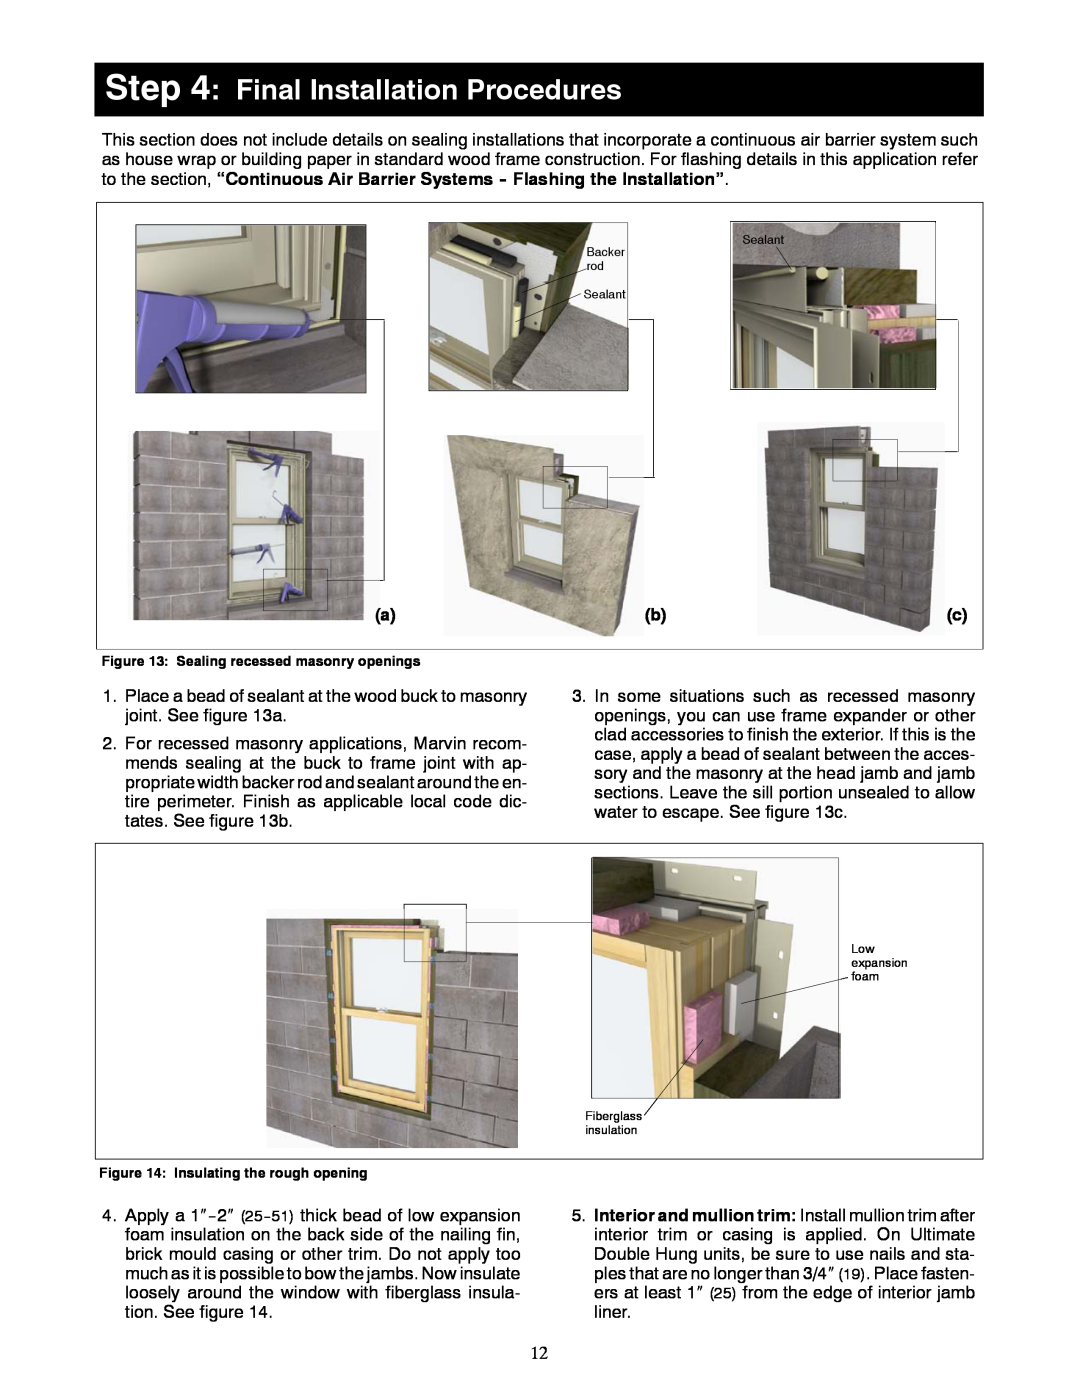 Marvin Window manual Final Installation Procedures, Sealing recessed masonry openings, Insulating the rough opening 